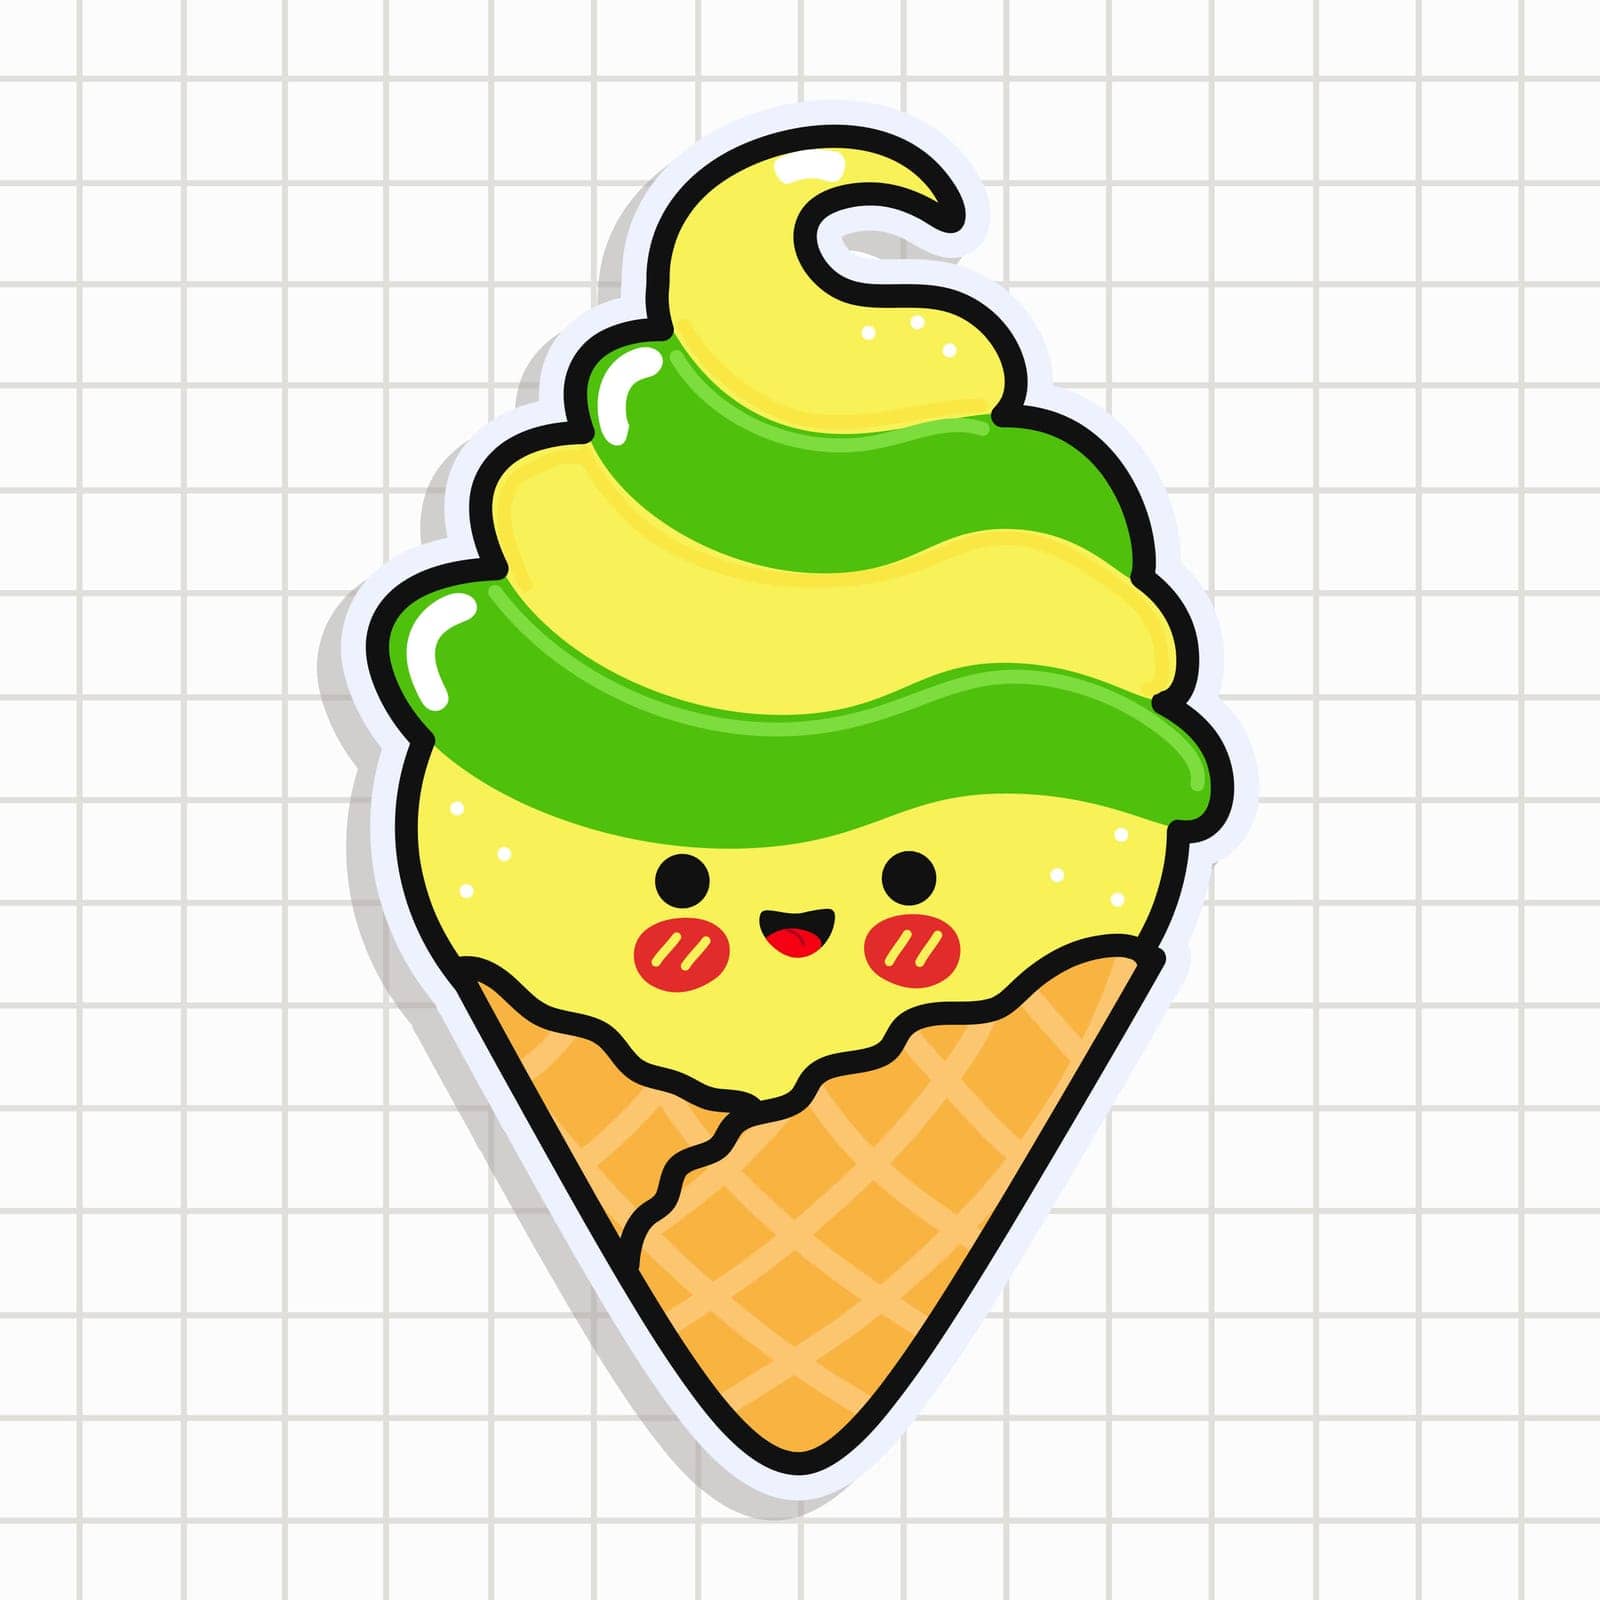 Cute funny Ice cream sticker. Vector hand drawn cartoon kawaii character illustration icon. Isolated on background. Happy Ice cream character concept